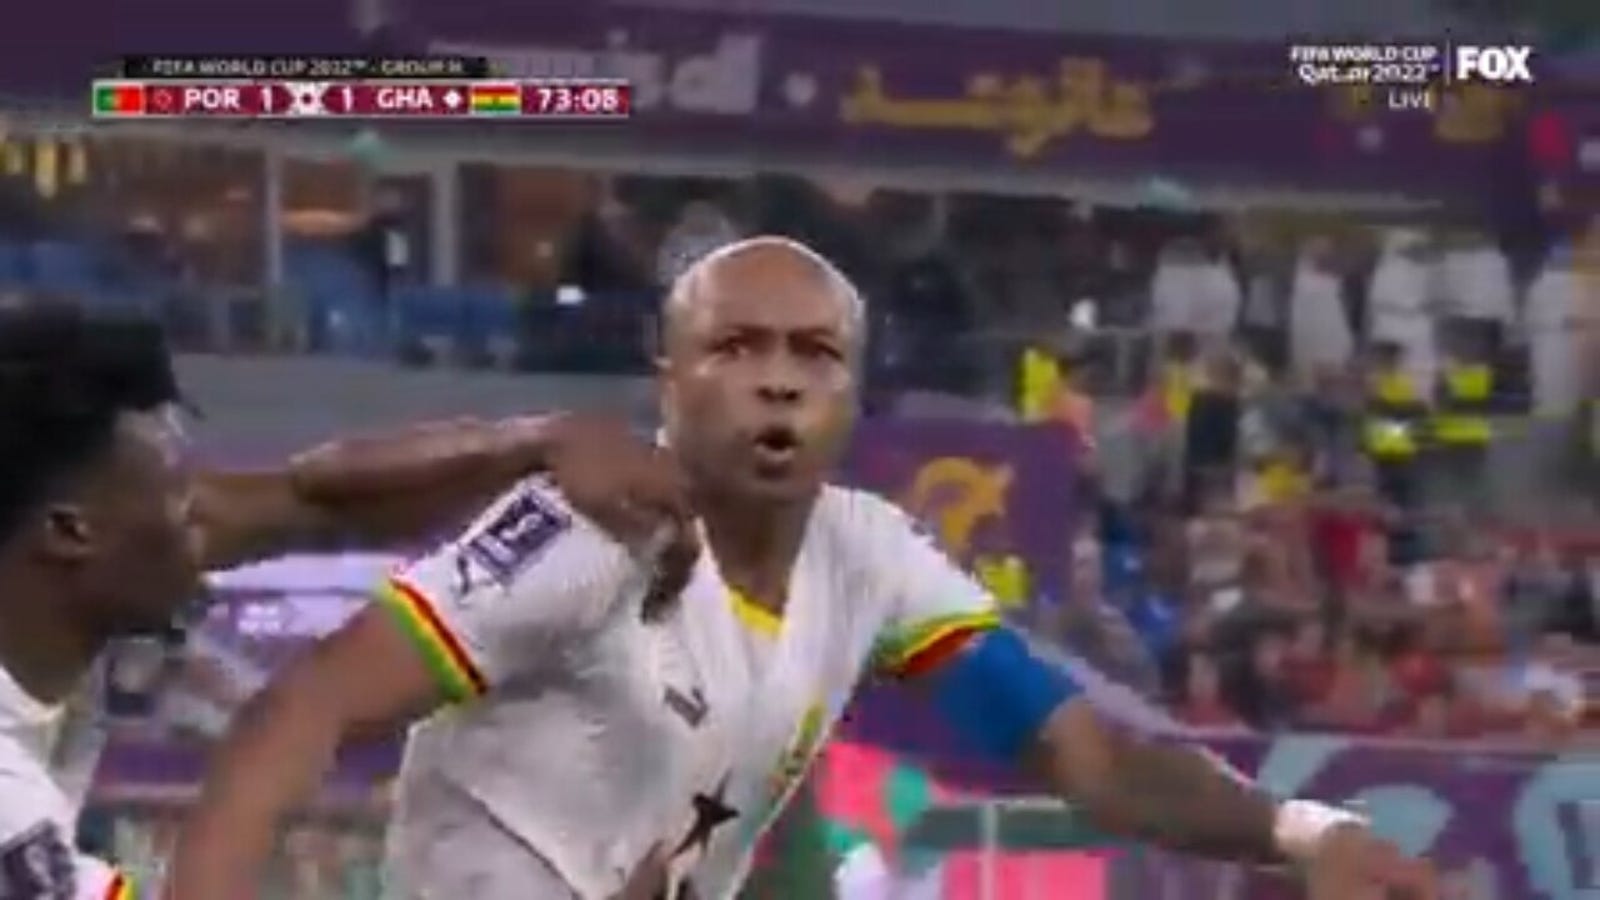 Ghana's André Ayew scores goal vs. Portugal in 73'